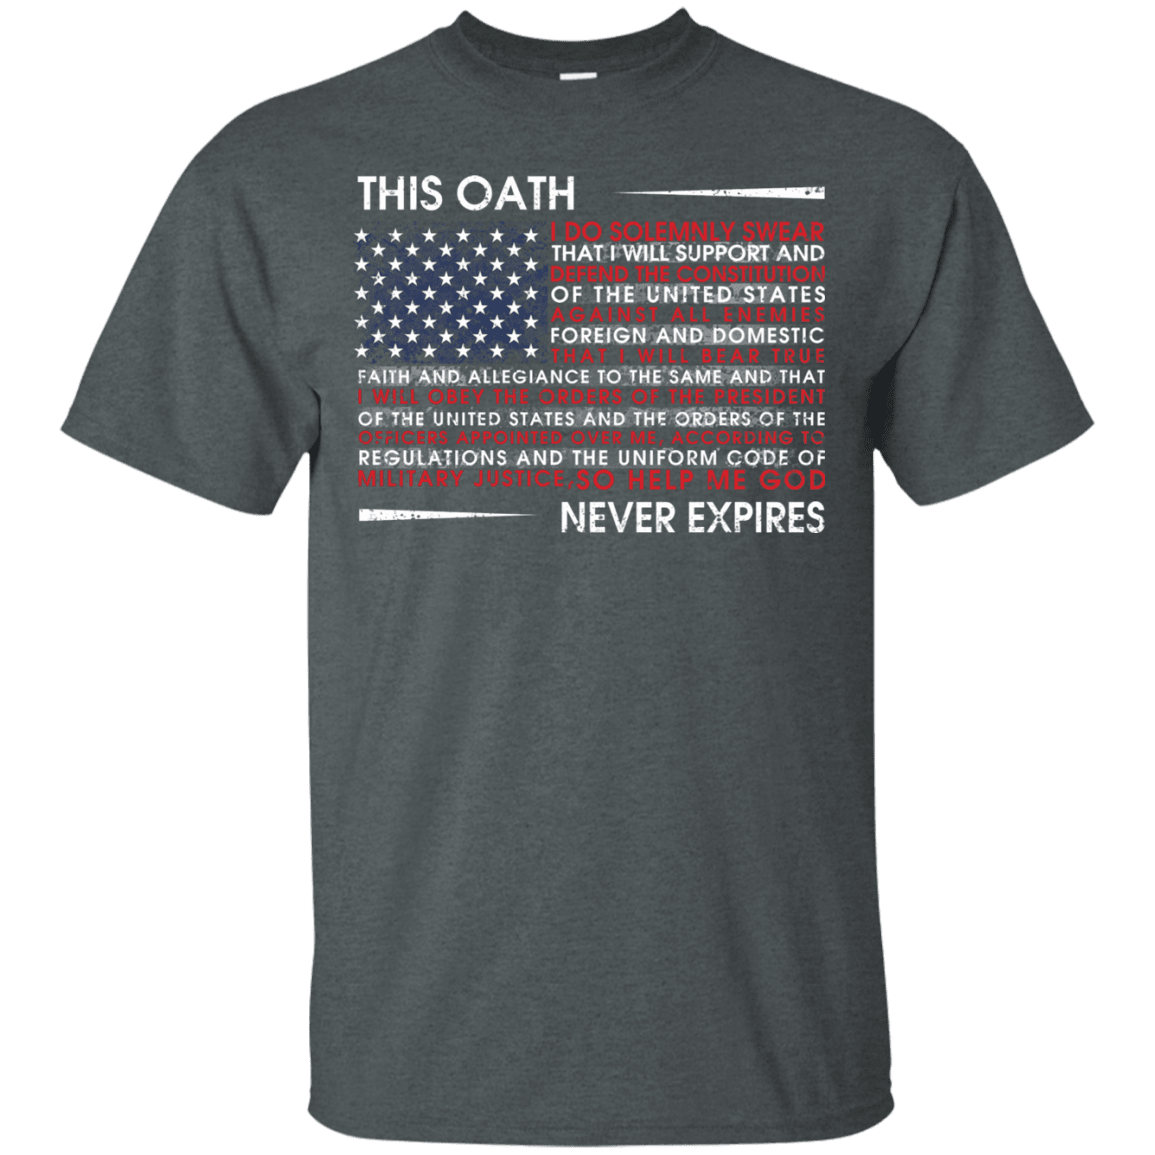 Military T-Shirt "This Oath Never Expires Men" Front-TShirt-General-Veterans Nation